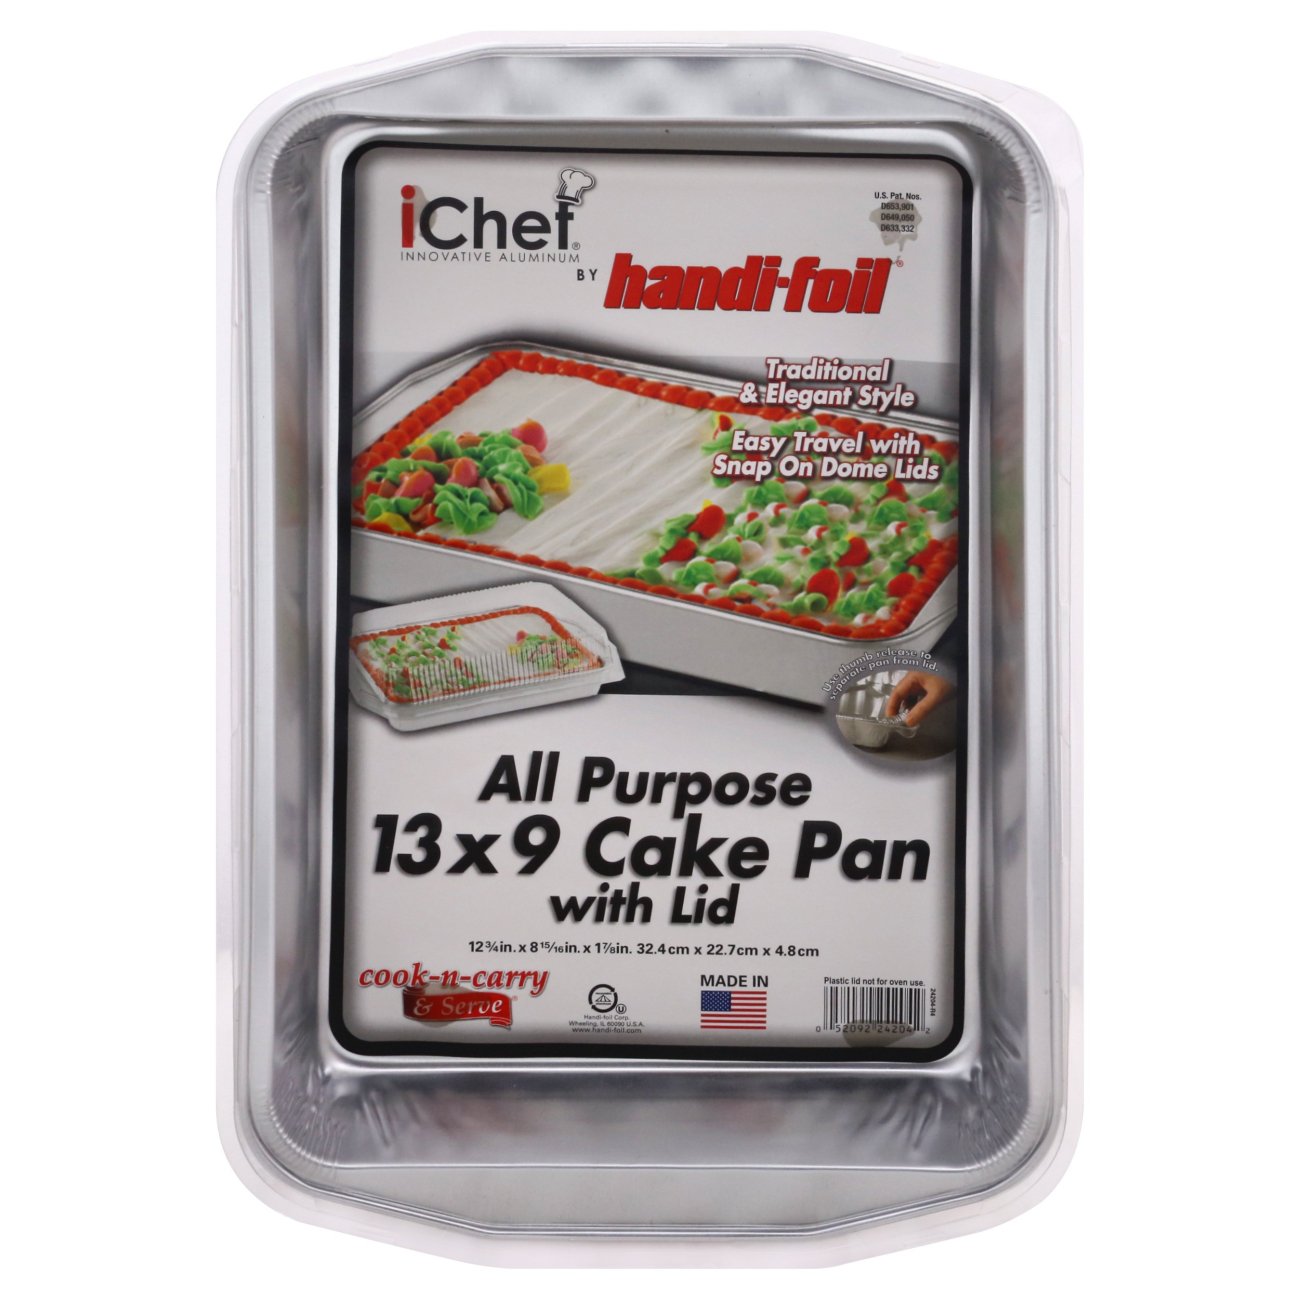 iChef Cook-n-Carry & Serve All Purpose Cake Pan with Lid